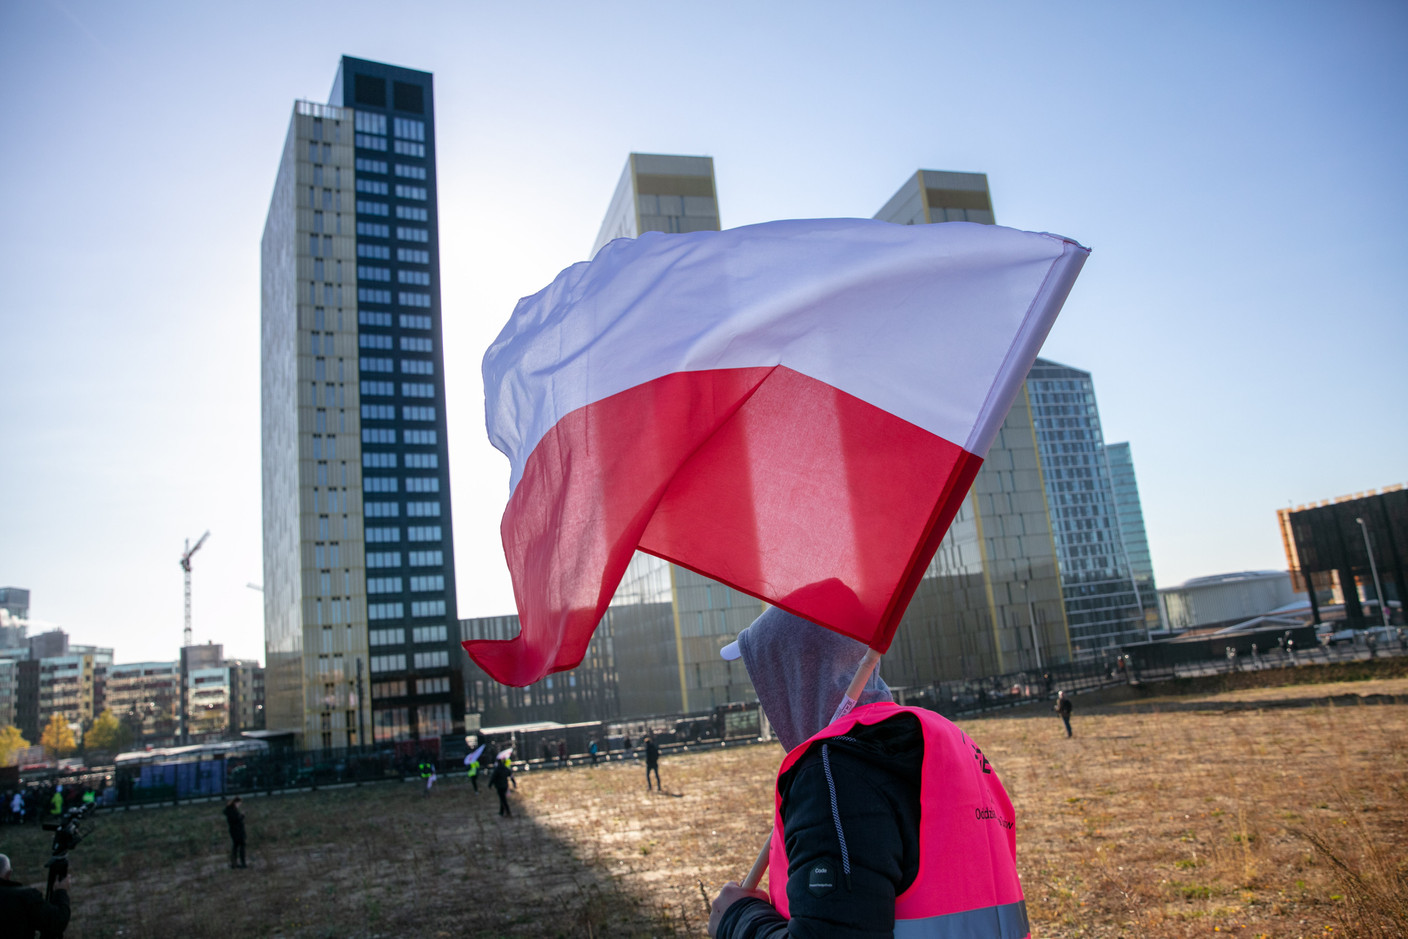 The protest took place in Kirchberg. (Photo: Romain Gamba/Maison Moderne)